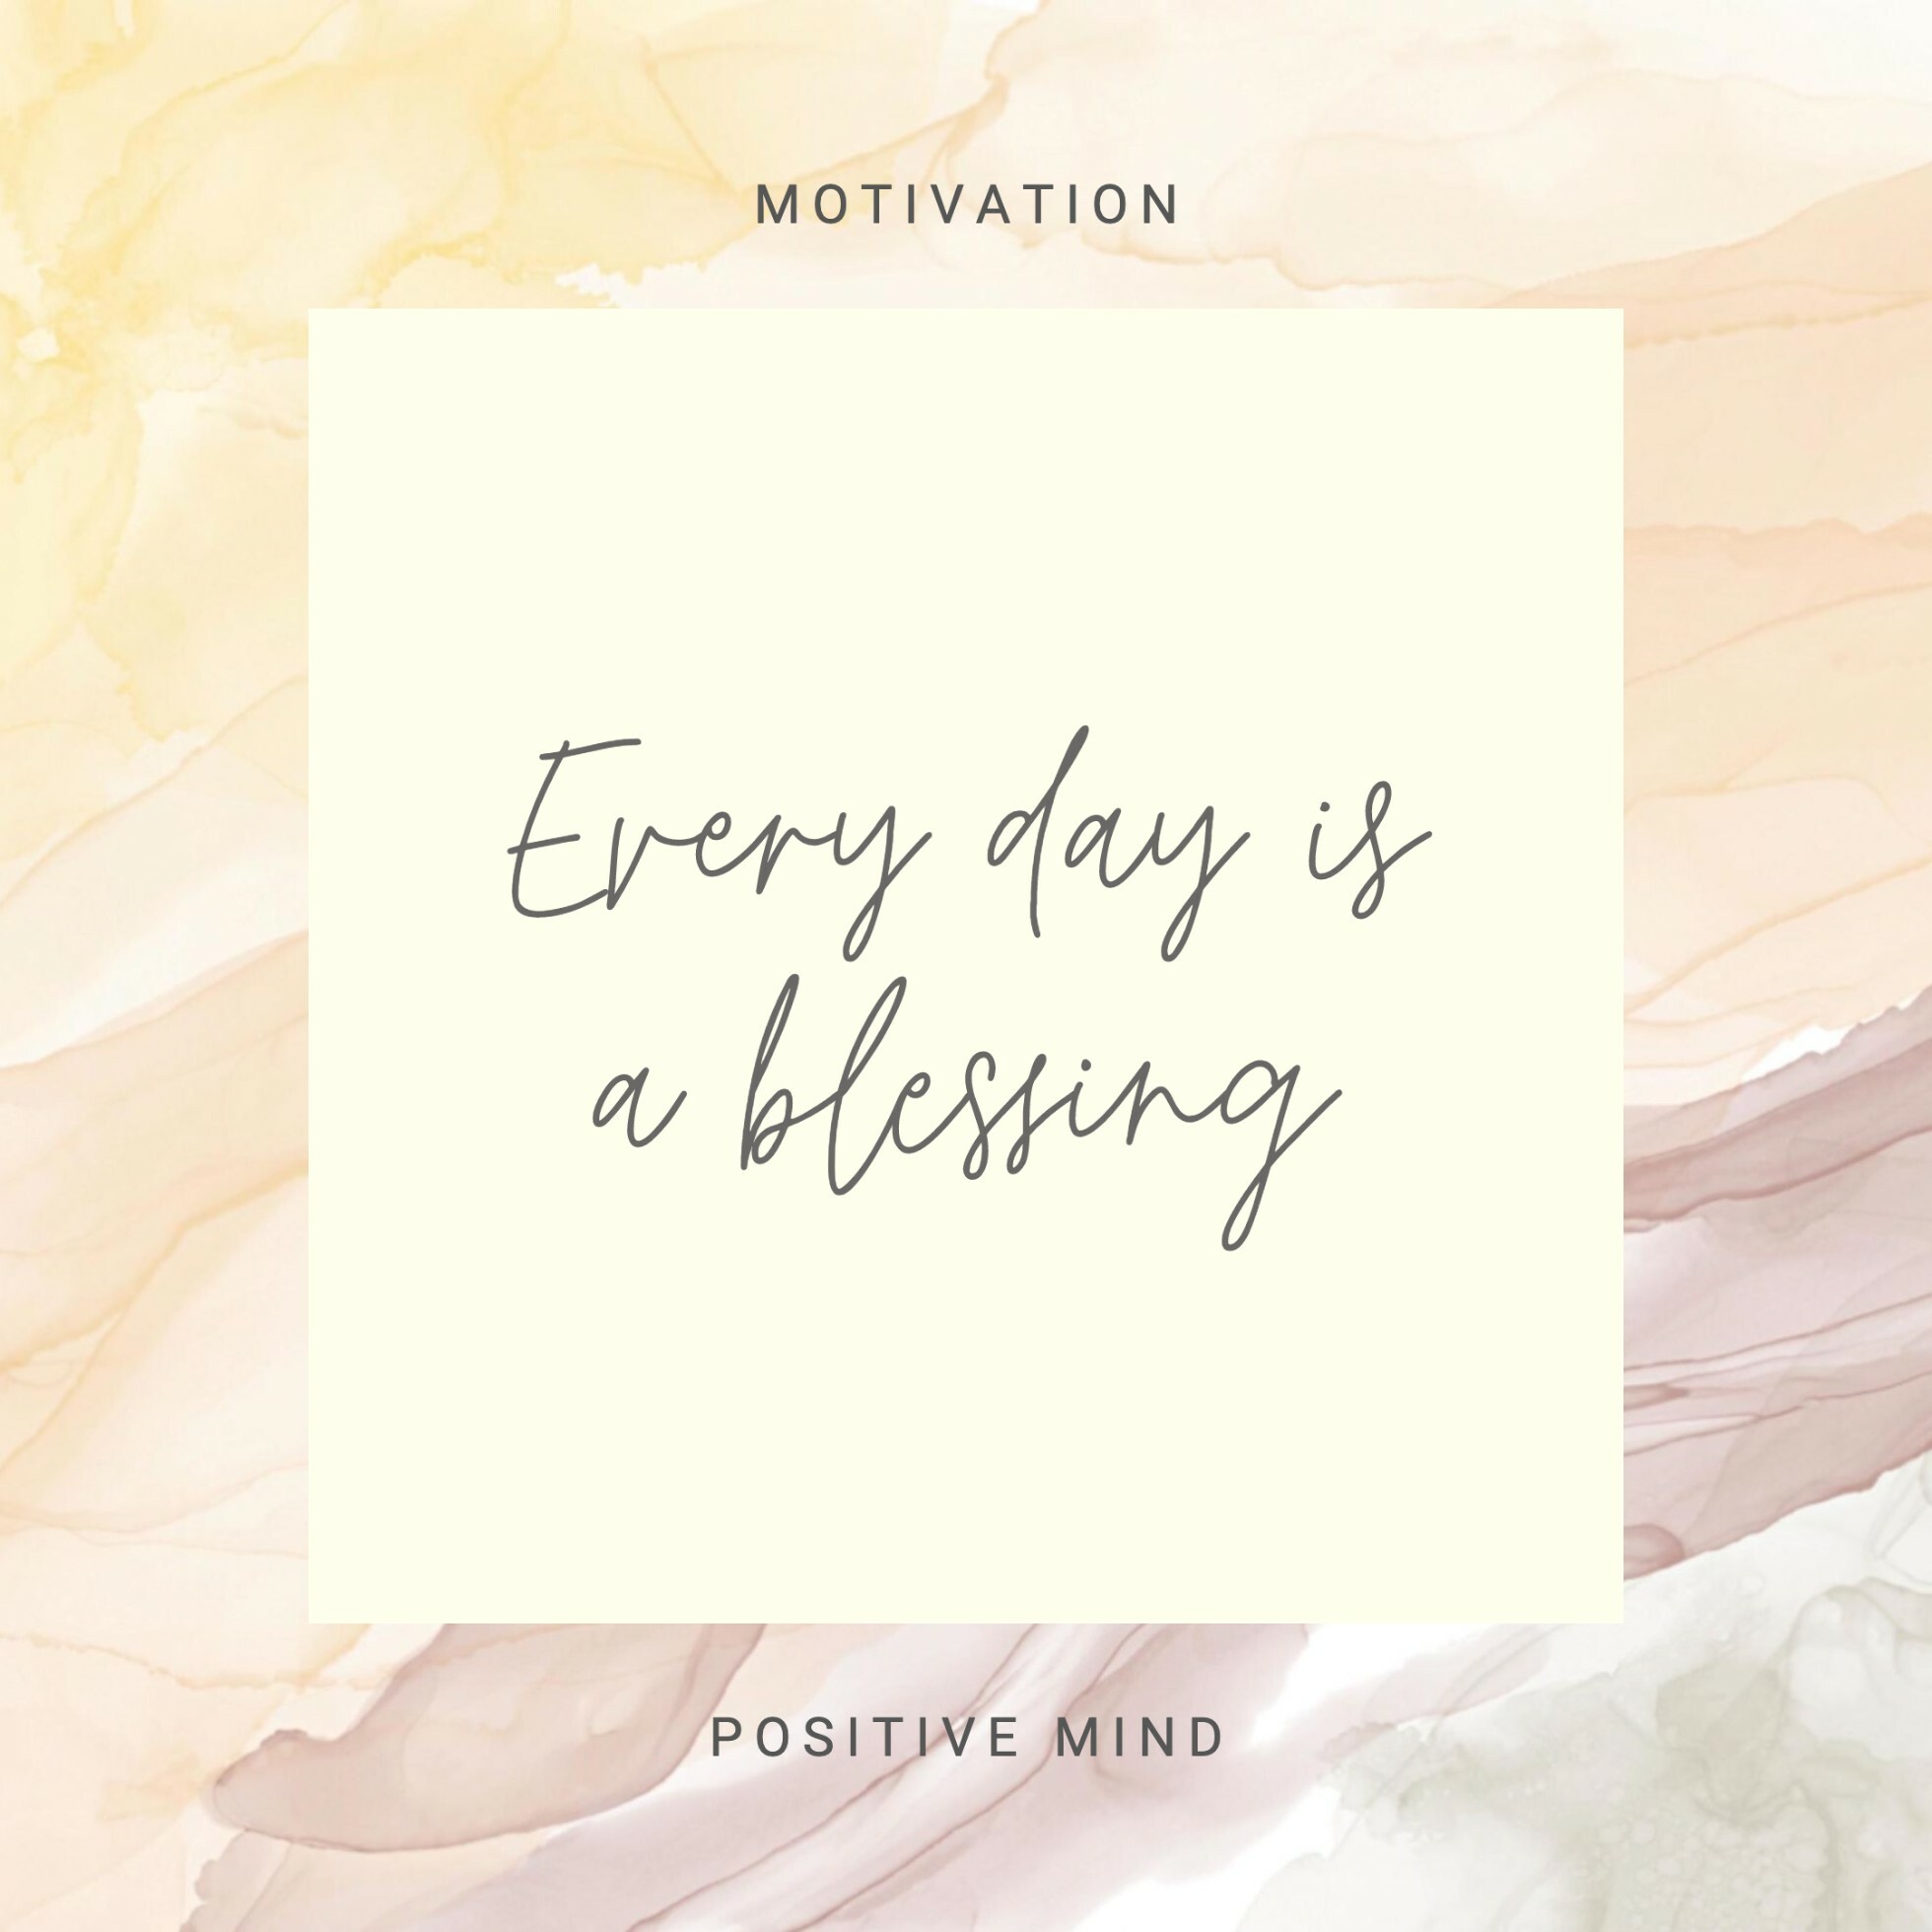 Yellow Abstract Blessing Motivation Quote Instagram Post template